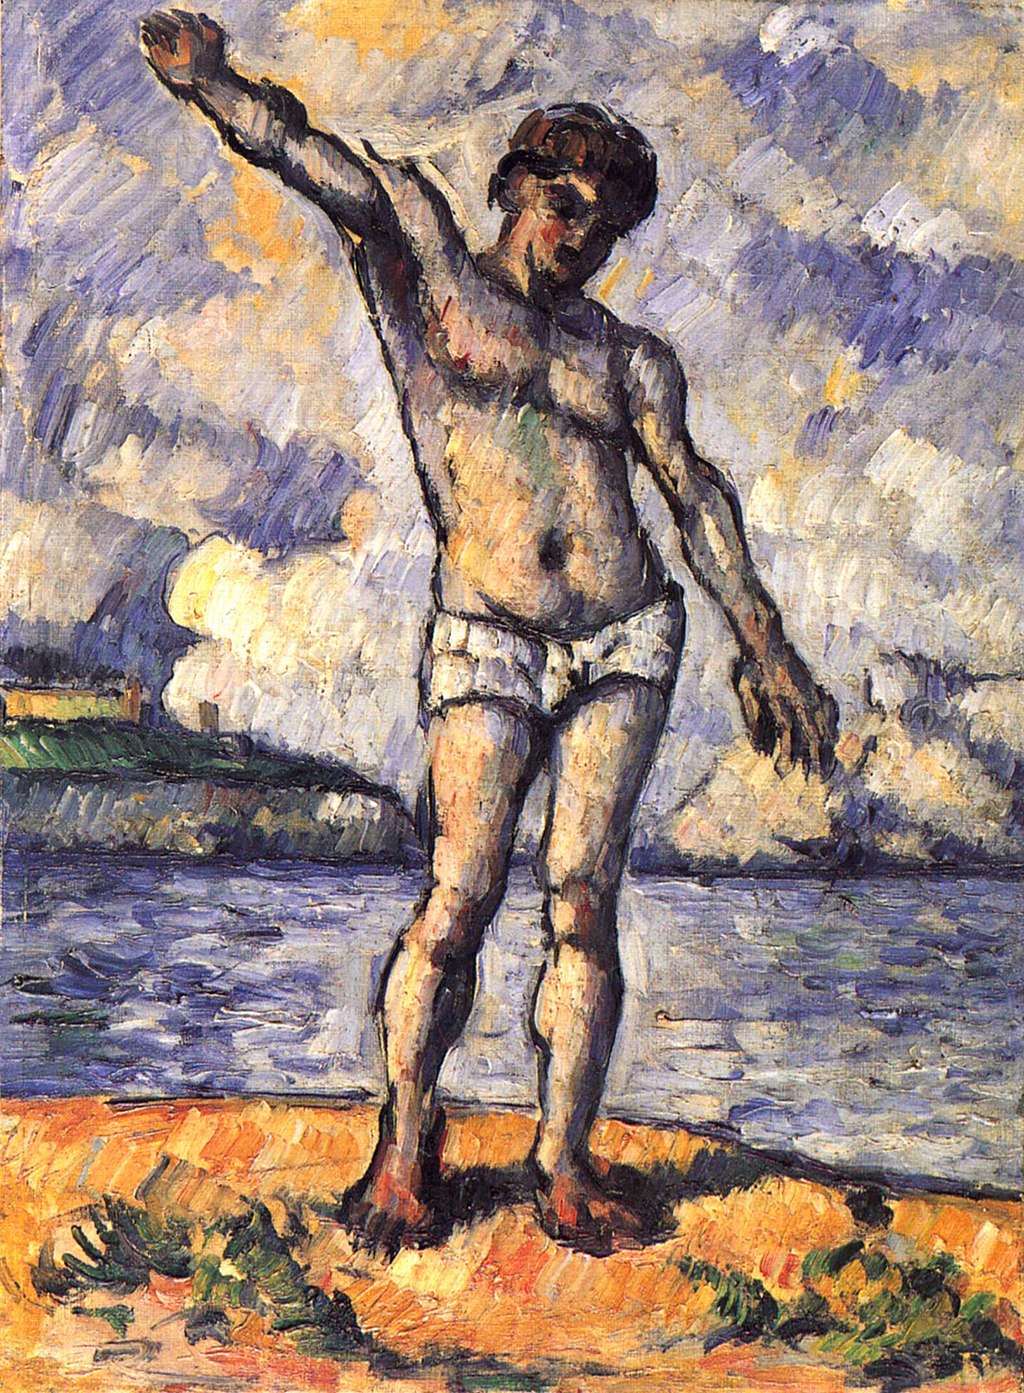 Man Standing, Arms Extended in Detail Paul Cezanne